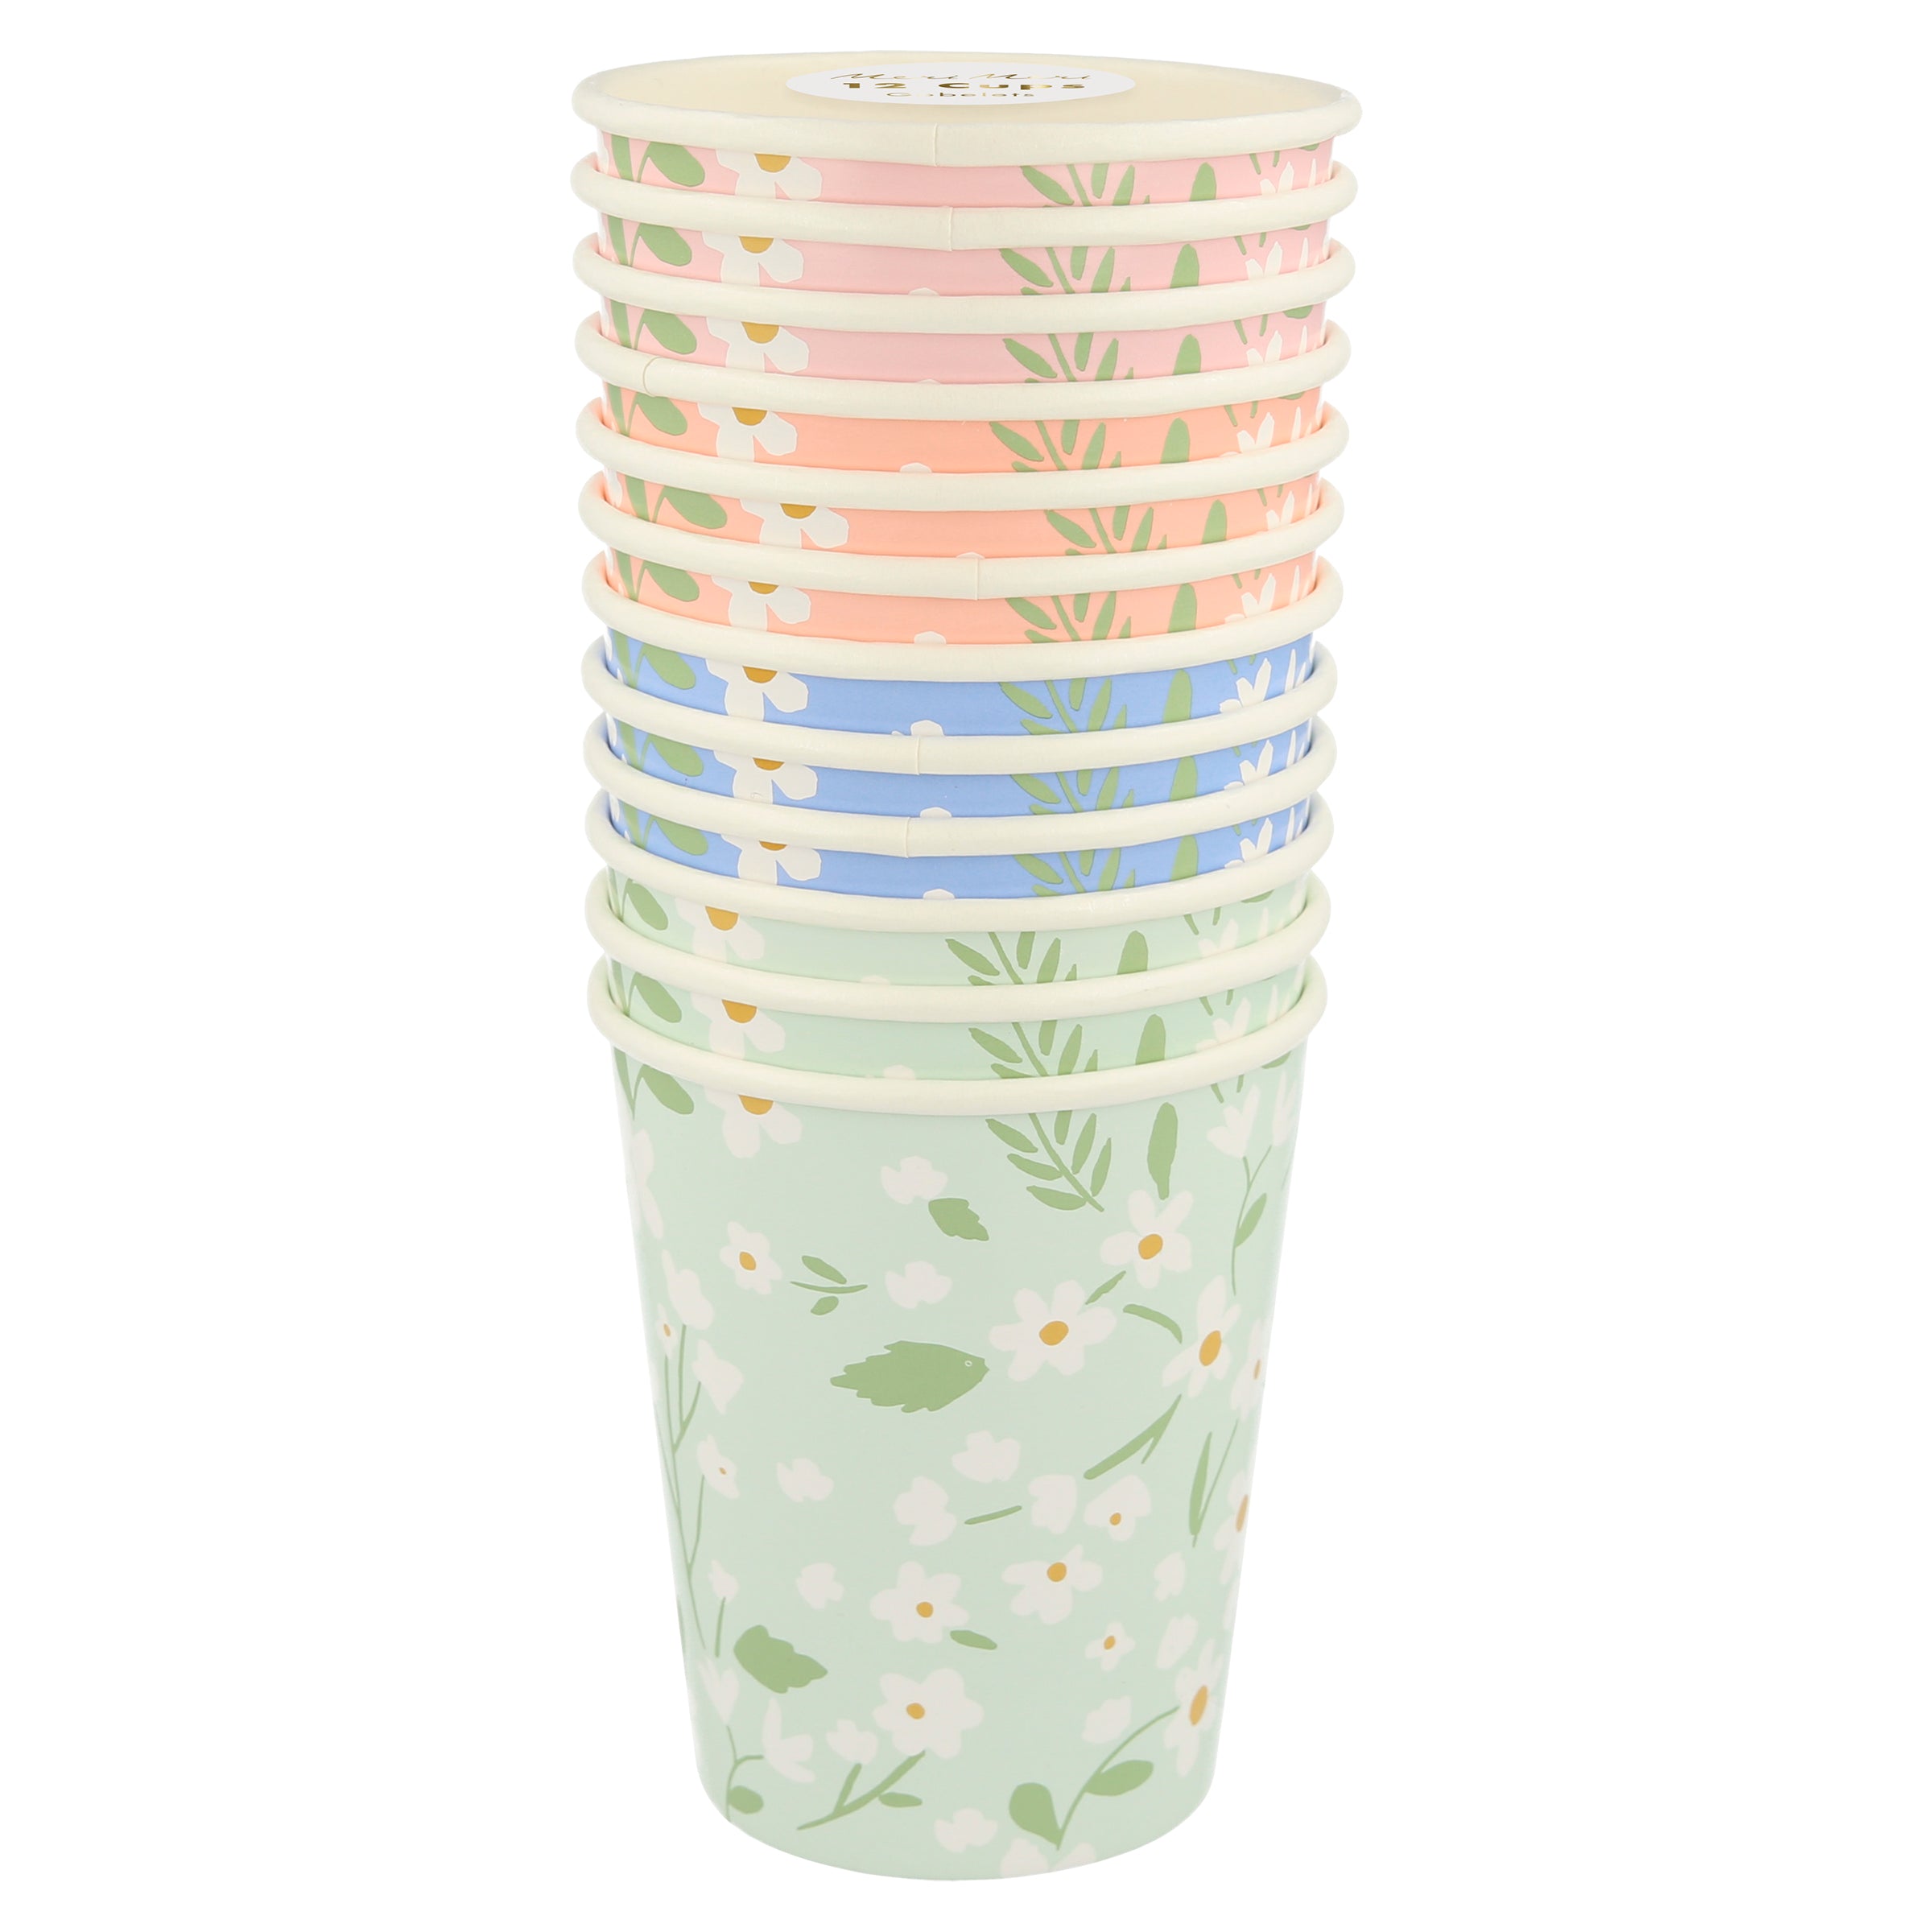 Make your party table look amazing with our pretty party cups, crafted from paper with a floral design.